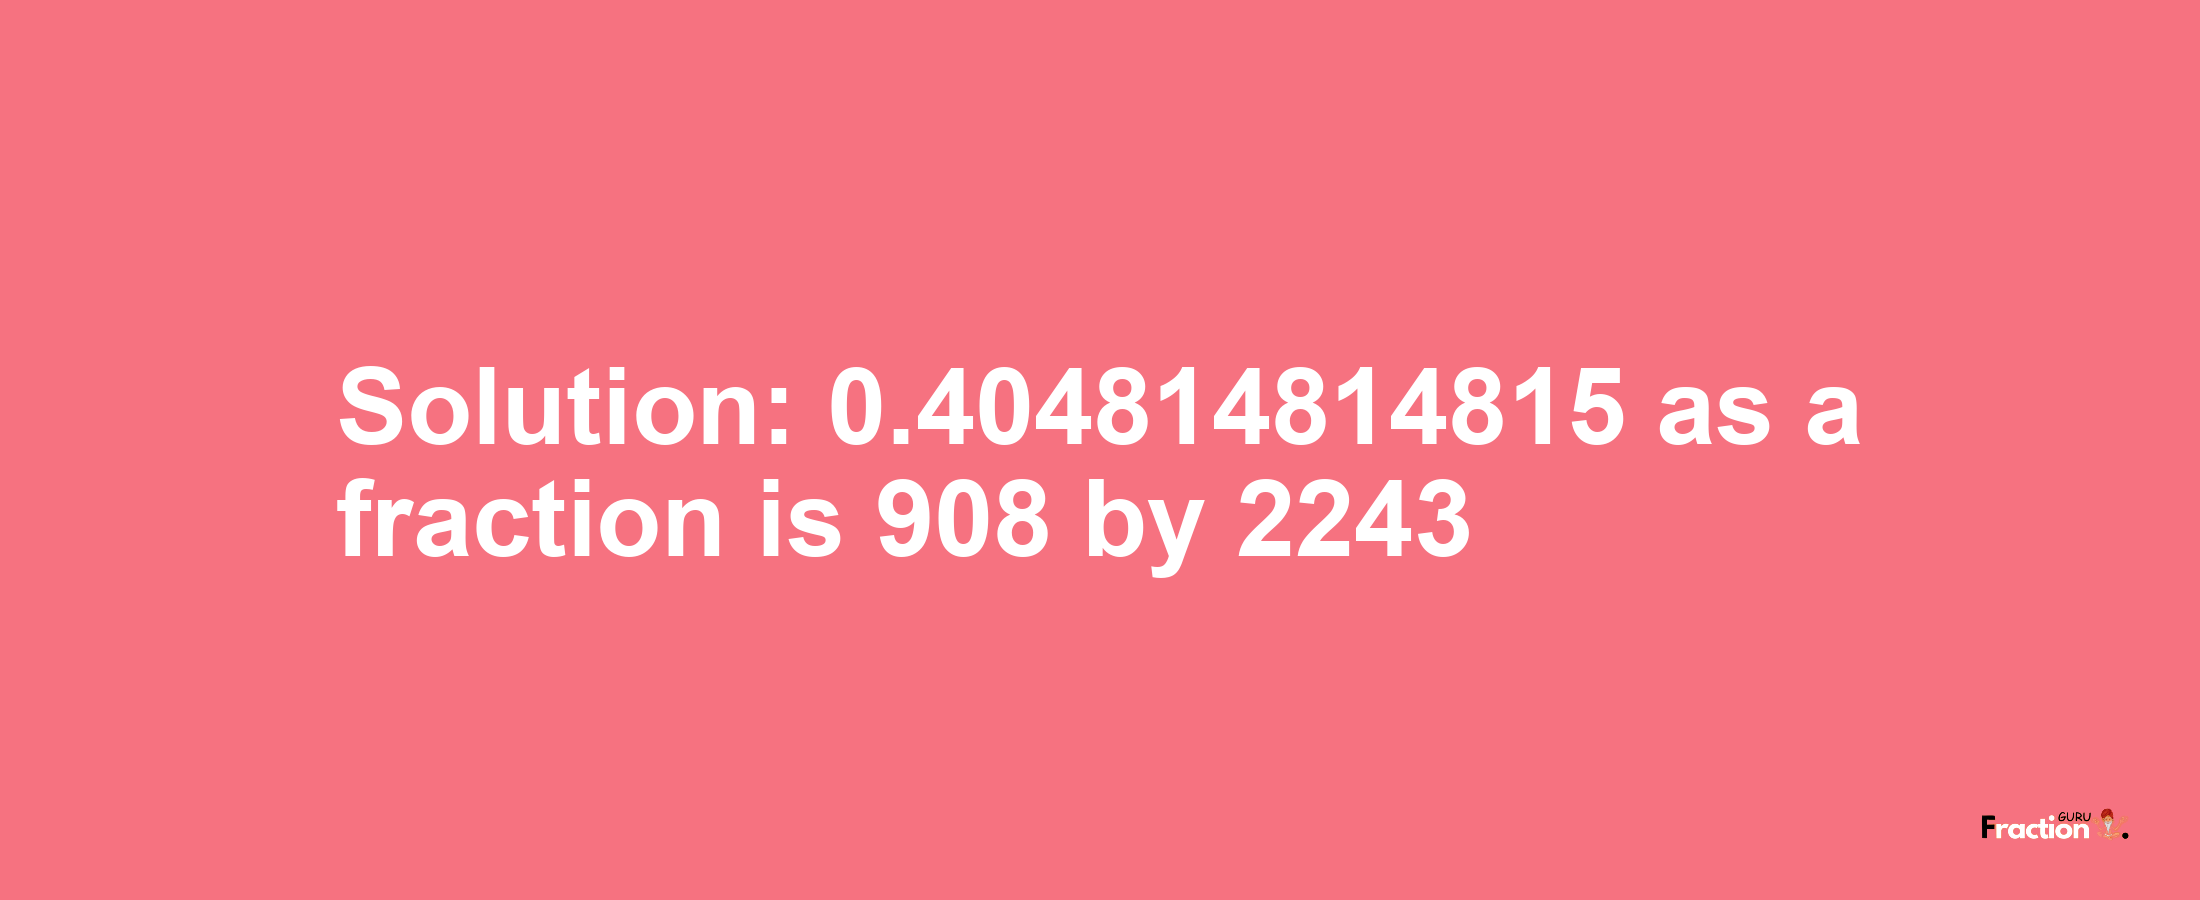 Solution:0.404814814815 as a fraction is 908/2243